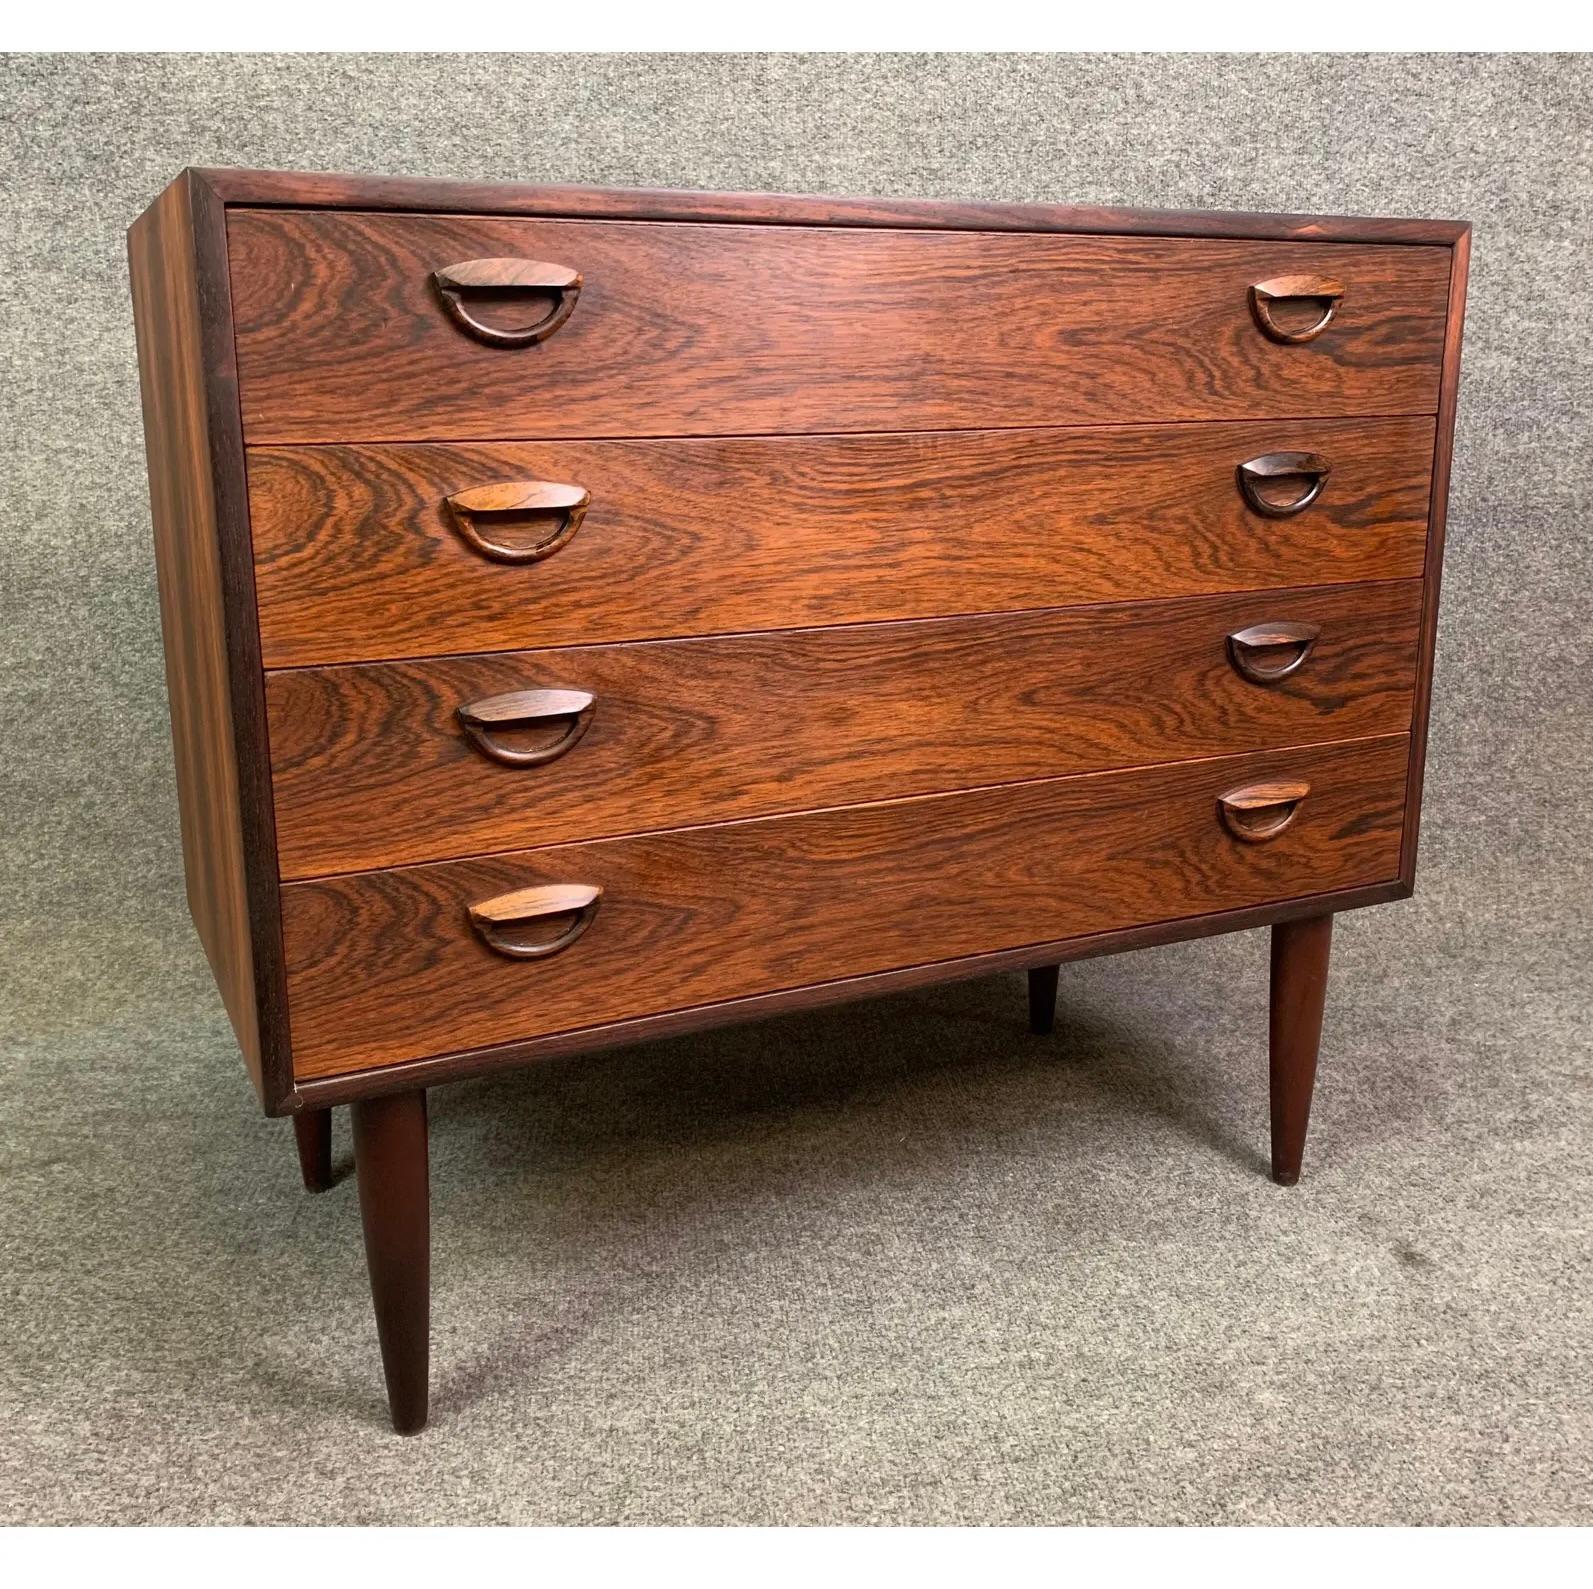 Here is a beautiful Scandinavian modern chest of drawers in Brazilian rosewood designed by Kai Kristiansen and manufactured by Feldballes Mobelfabrik in Denmark in the 1960's. 
This exquisite case piece, recently imported from Europe to California